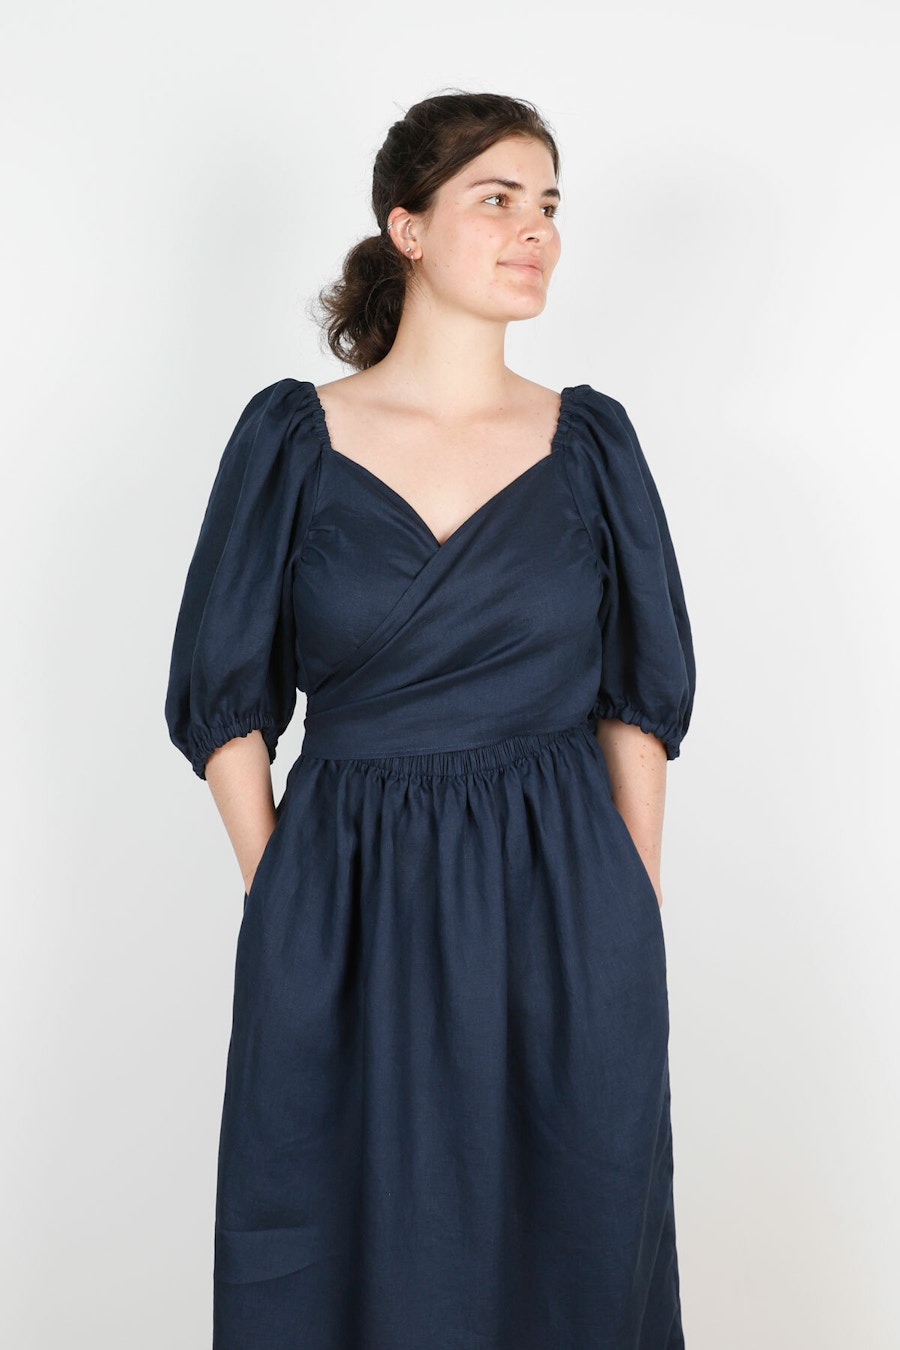 Front Crop Crossover Papercut Patterns Estella Dress Navy Vintage Finish Linen By The Fabric Store